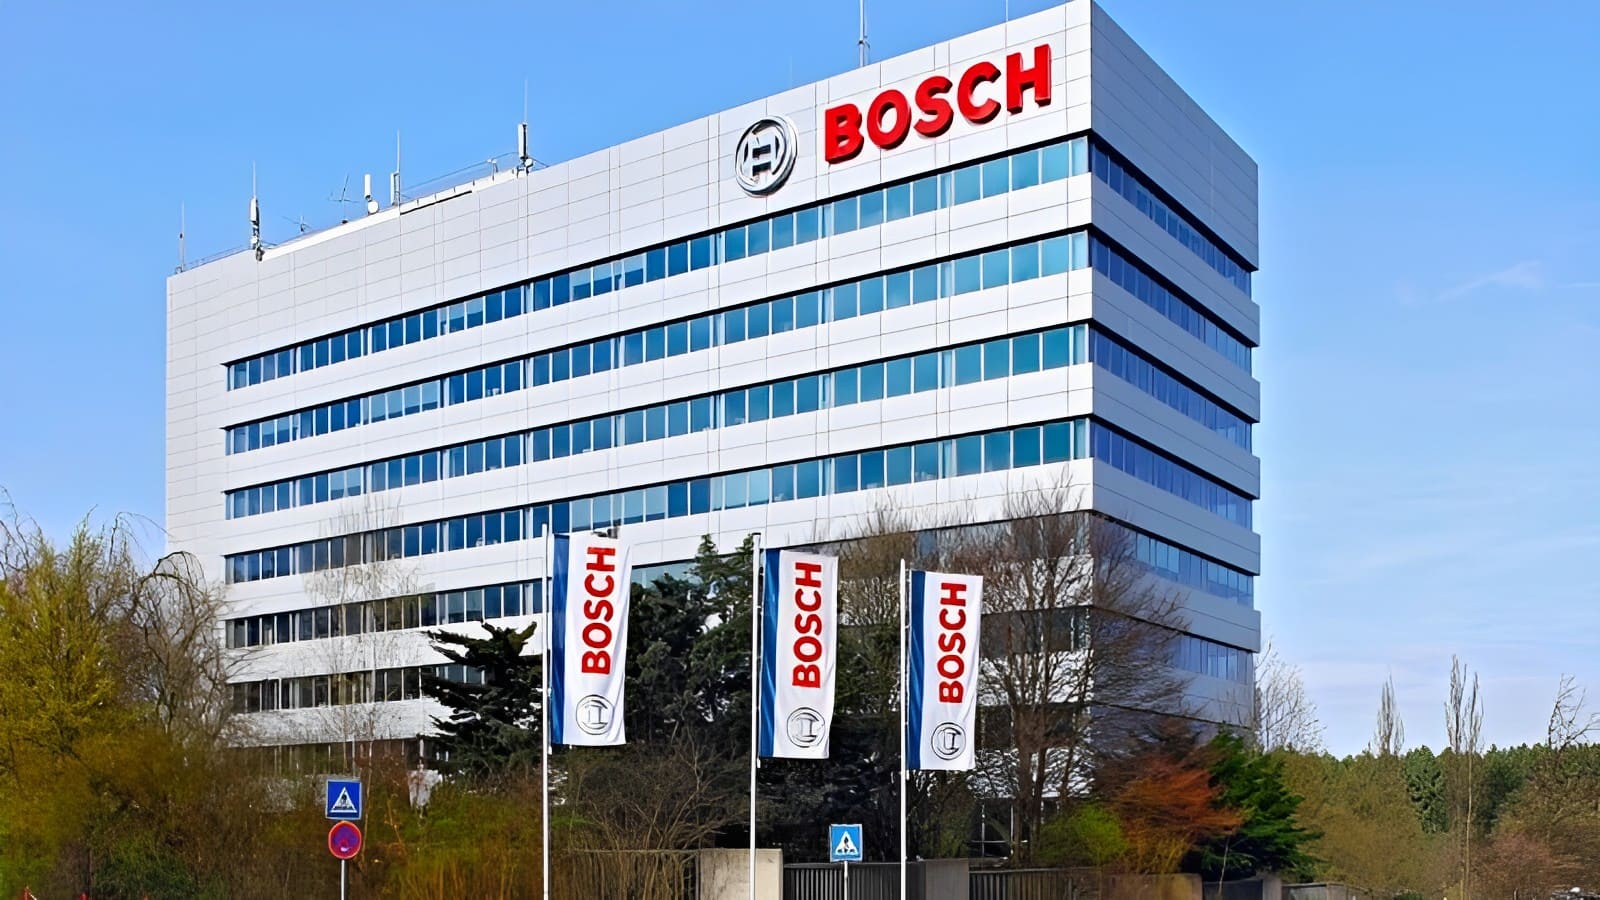 Bosch Q4FY23 Results: Consolidated PAT Rises to Rs 398.1 Cr